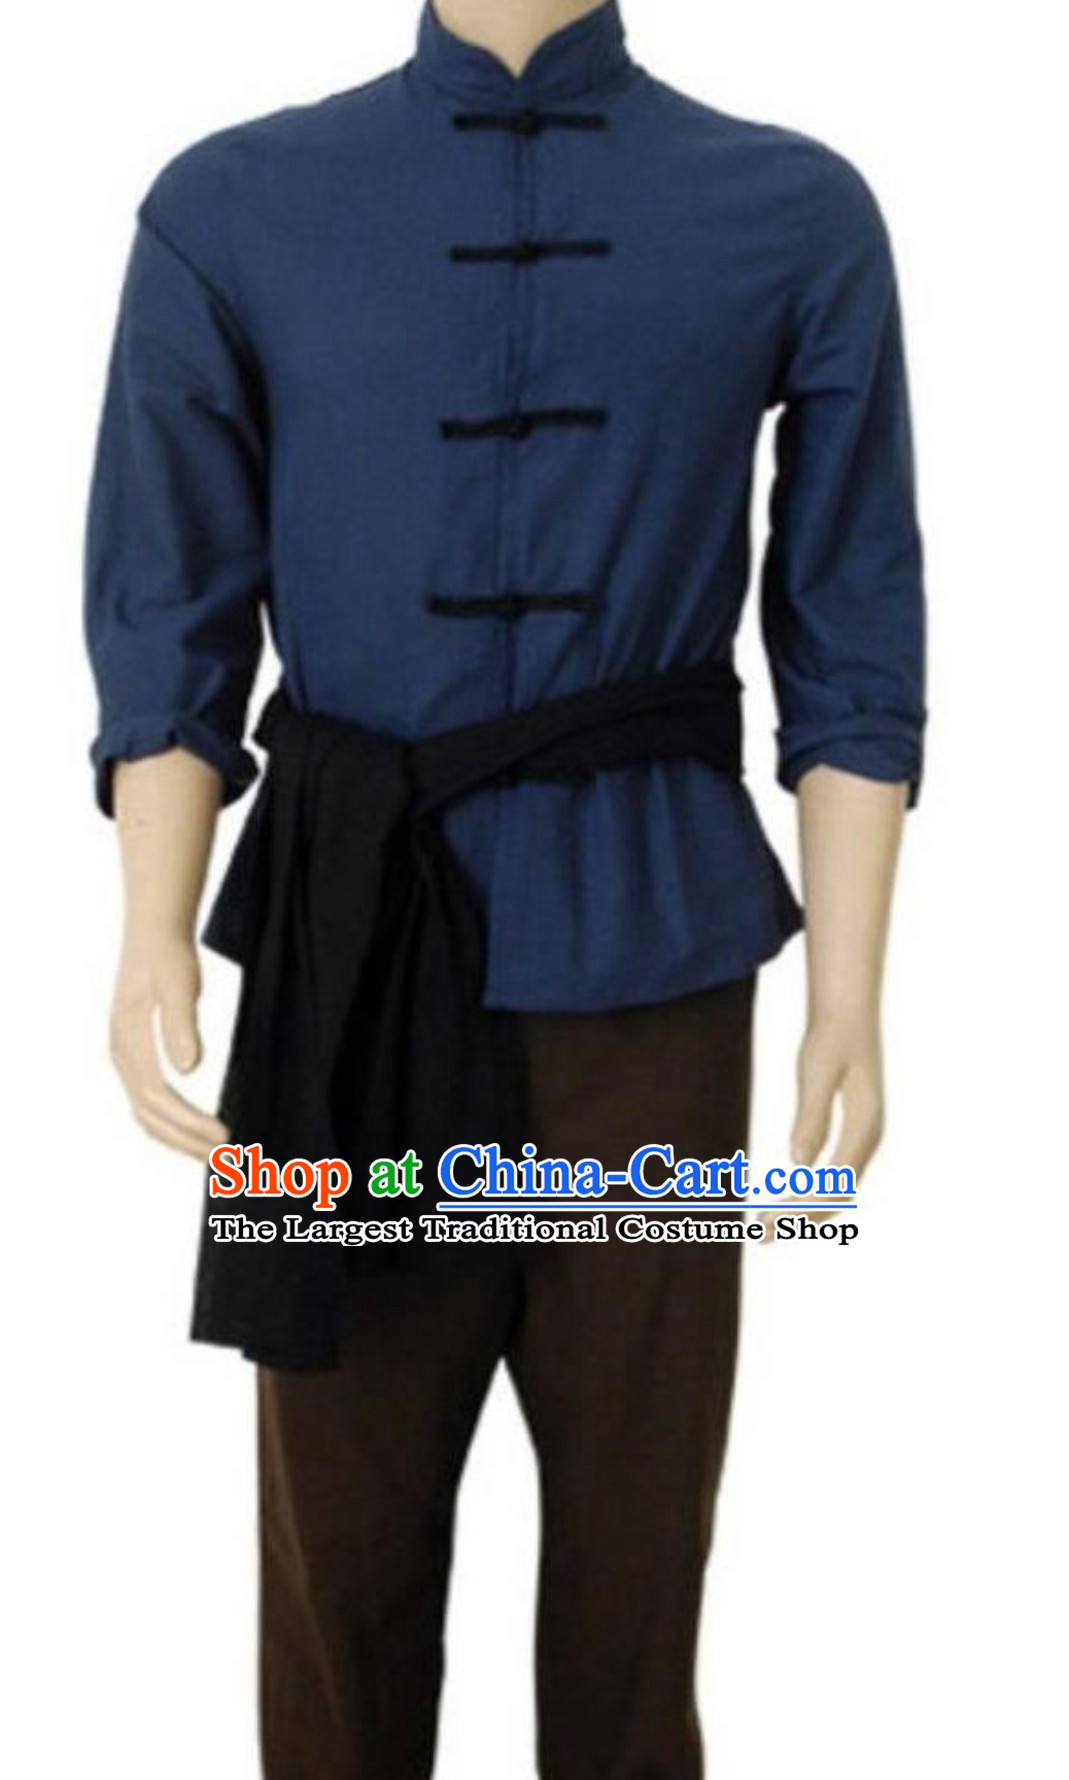 Ancient Chinese Poor People Costume Farmer Costumes Chinese Civilian Costume for Men